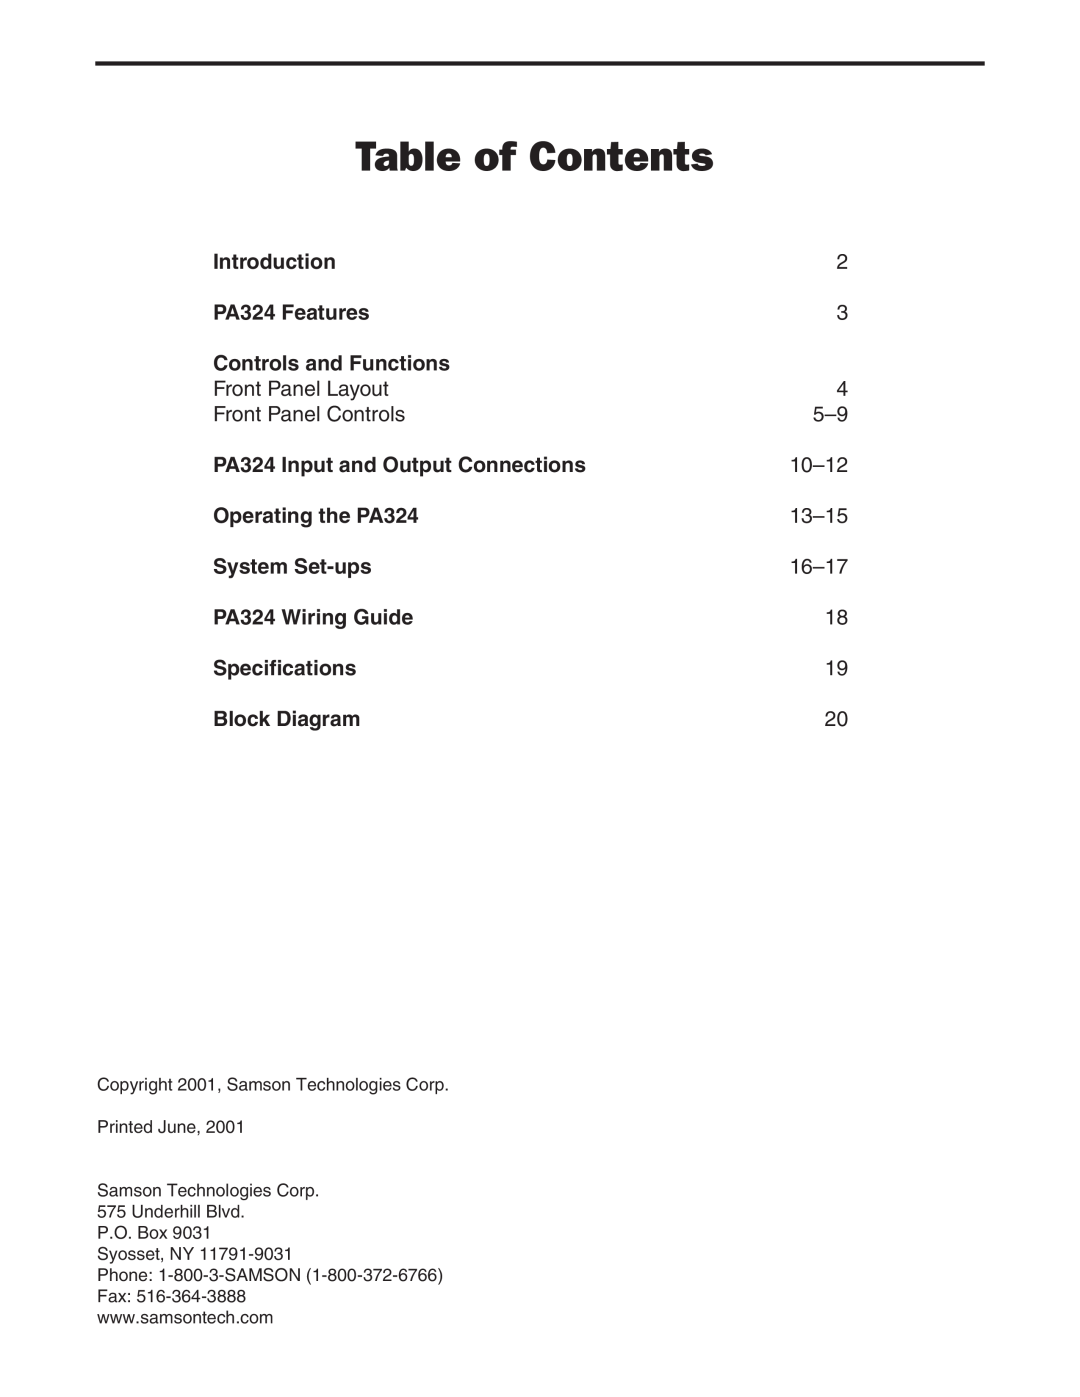 Samson Table of Contents, Introduction, PA324 Features, Controls and Functions, PA324 Input and Output Connections 